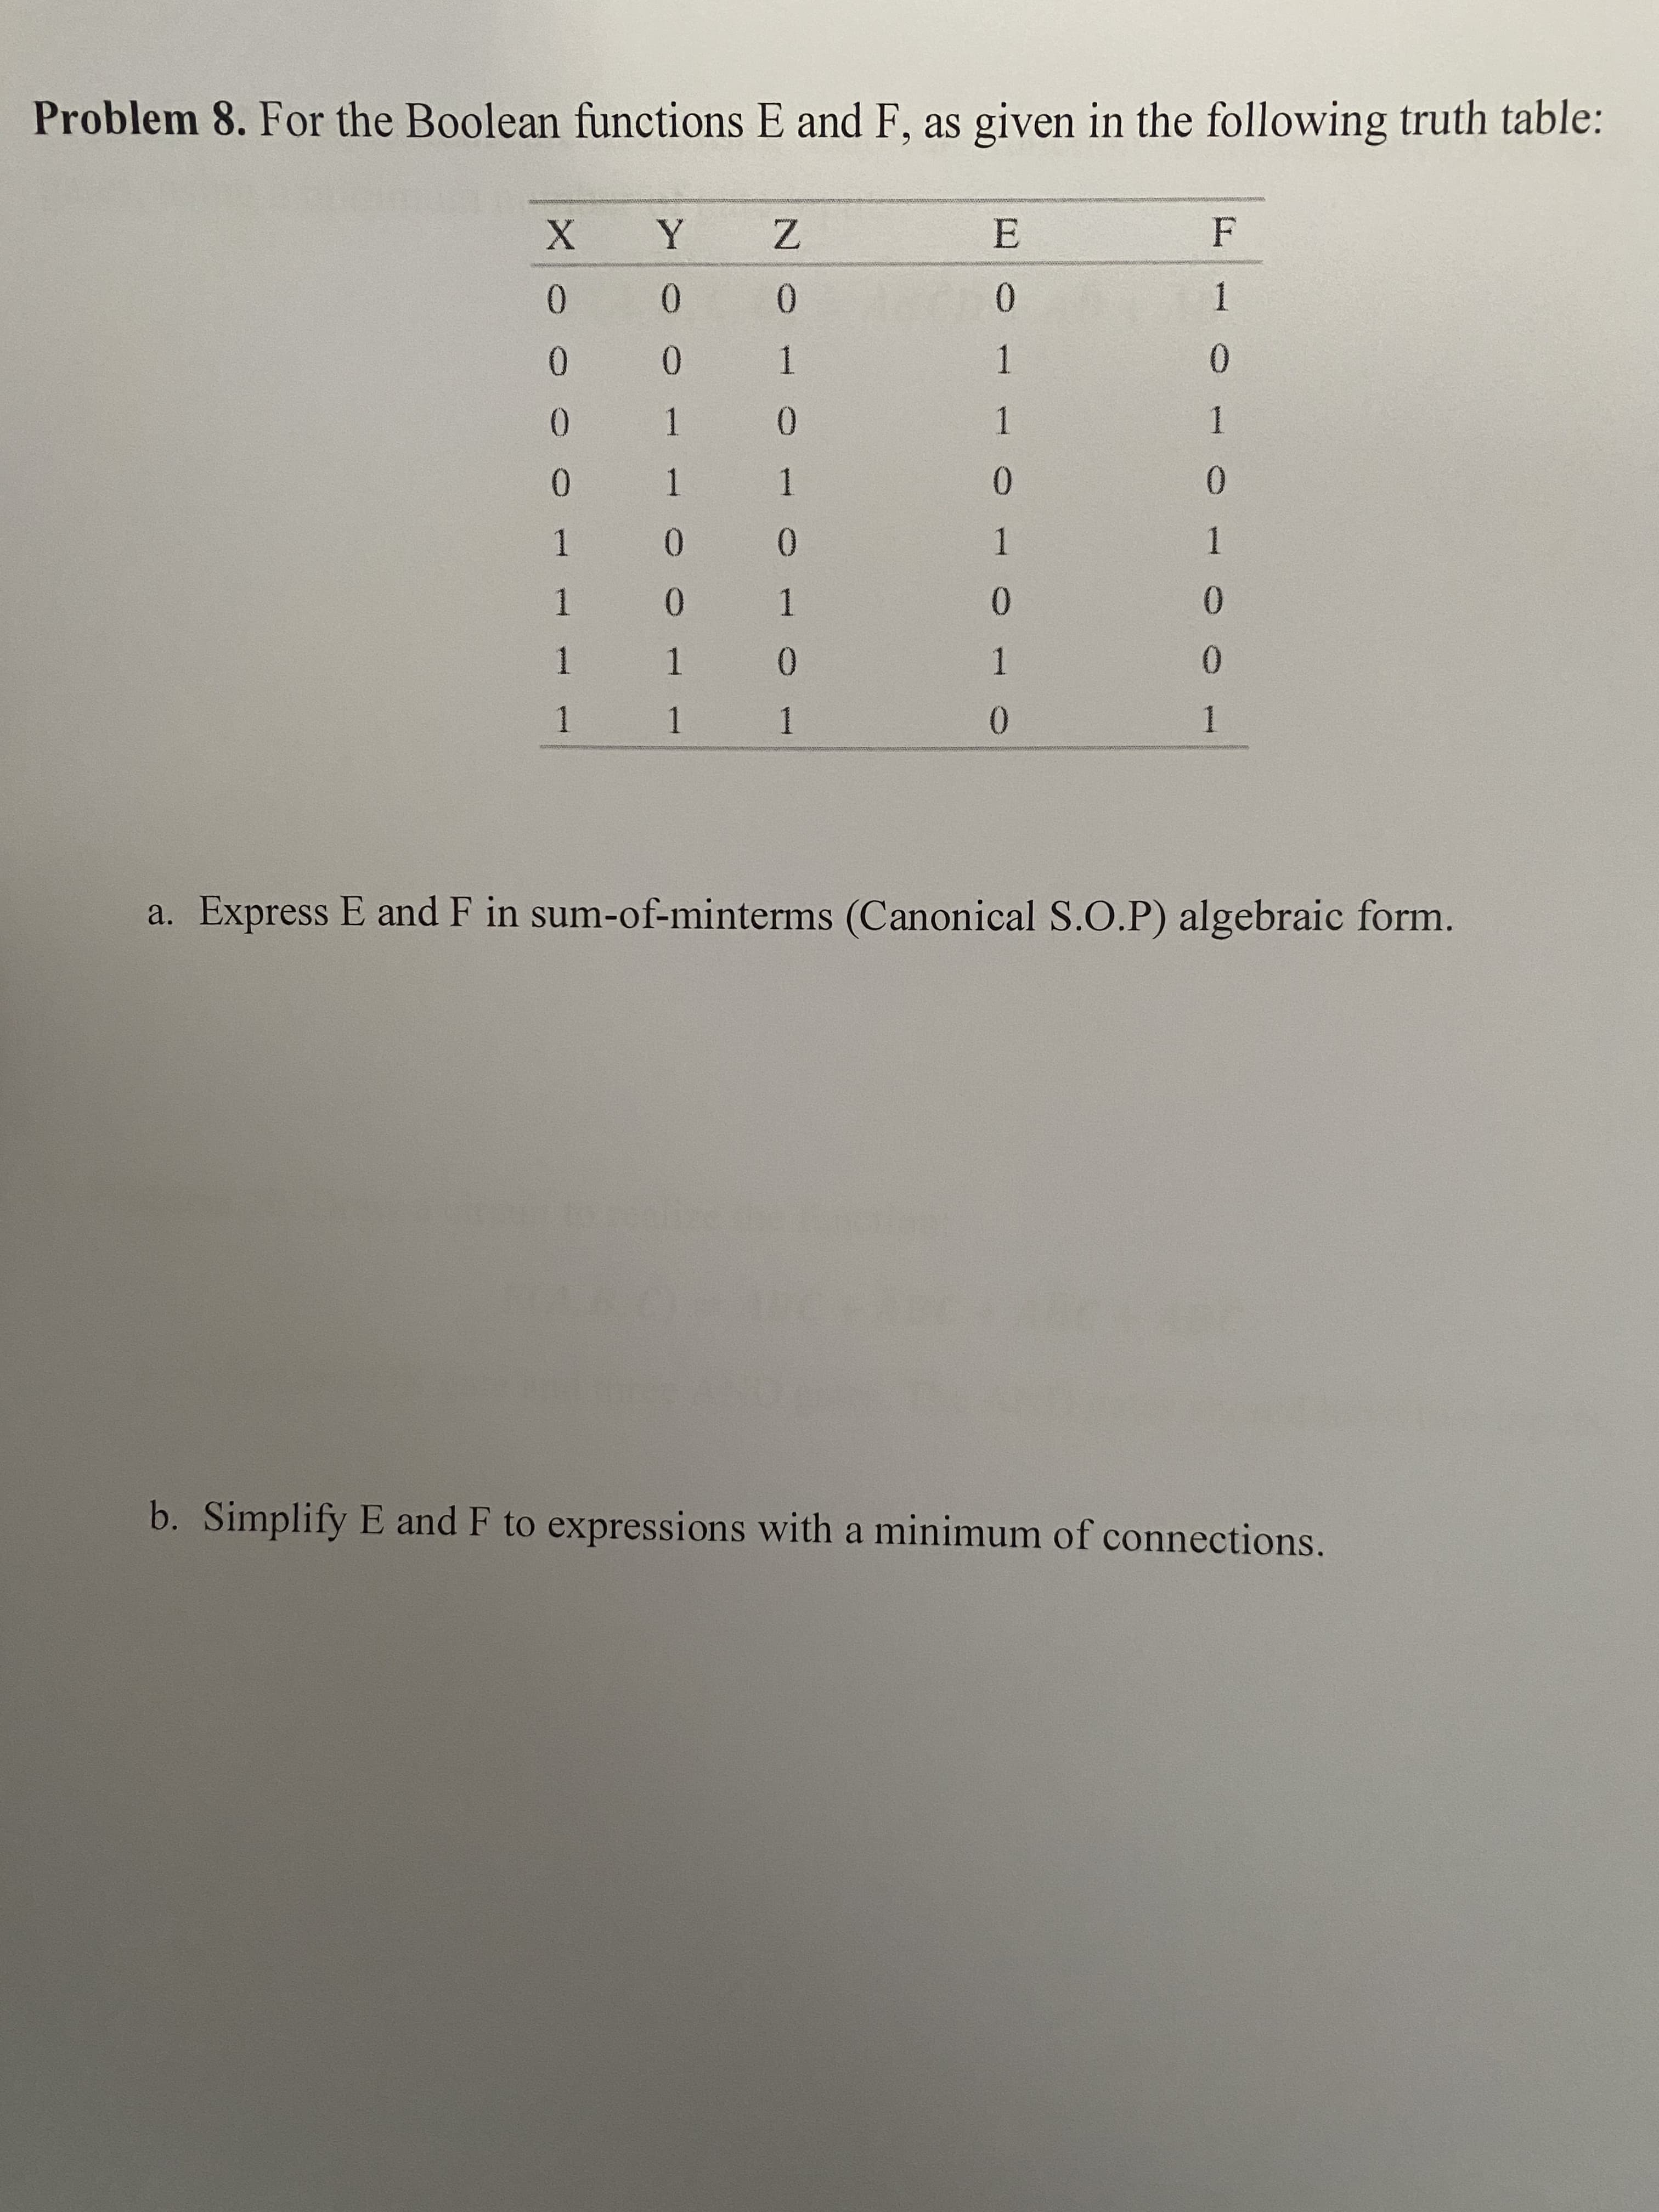 b. Simplify E and F to expressions with a minimum of connections.
a. Express E and F in sum-of-minterms (Canonical S.O.P) algebraic form.
1.
0.
0.
1 1
1.
1 1
1.
0.
0.
1.
0.
1
0.
1.
0.
0.
1.
0.
1.
0.
0.
1.
0.
1
1.
0.
ㅇ
0.
Problem 8. For the Boolean functions E and F, as given in the following truth table:
